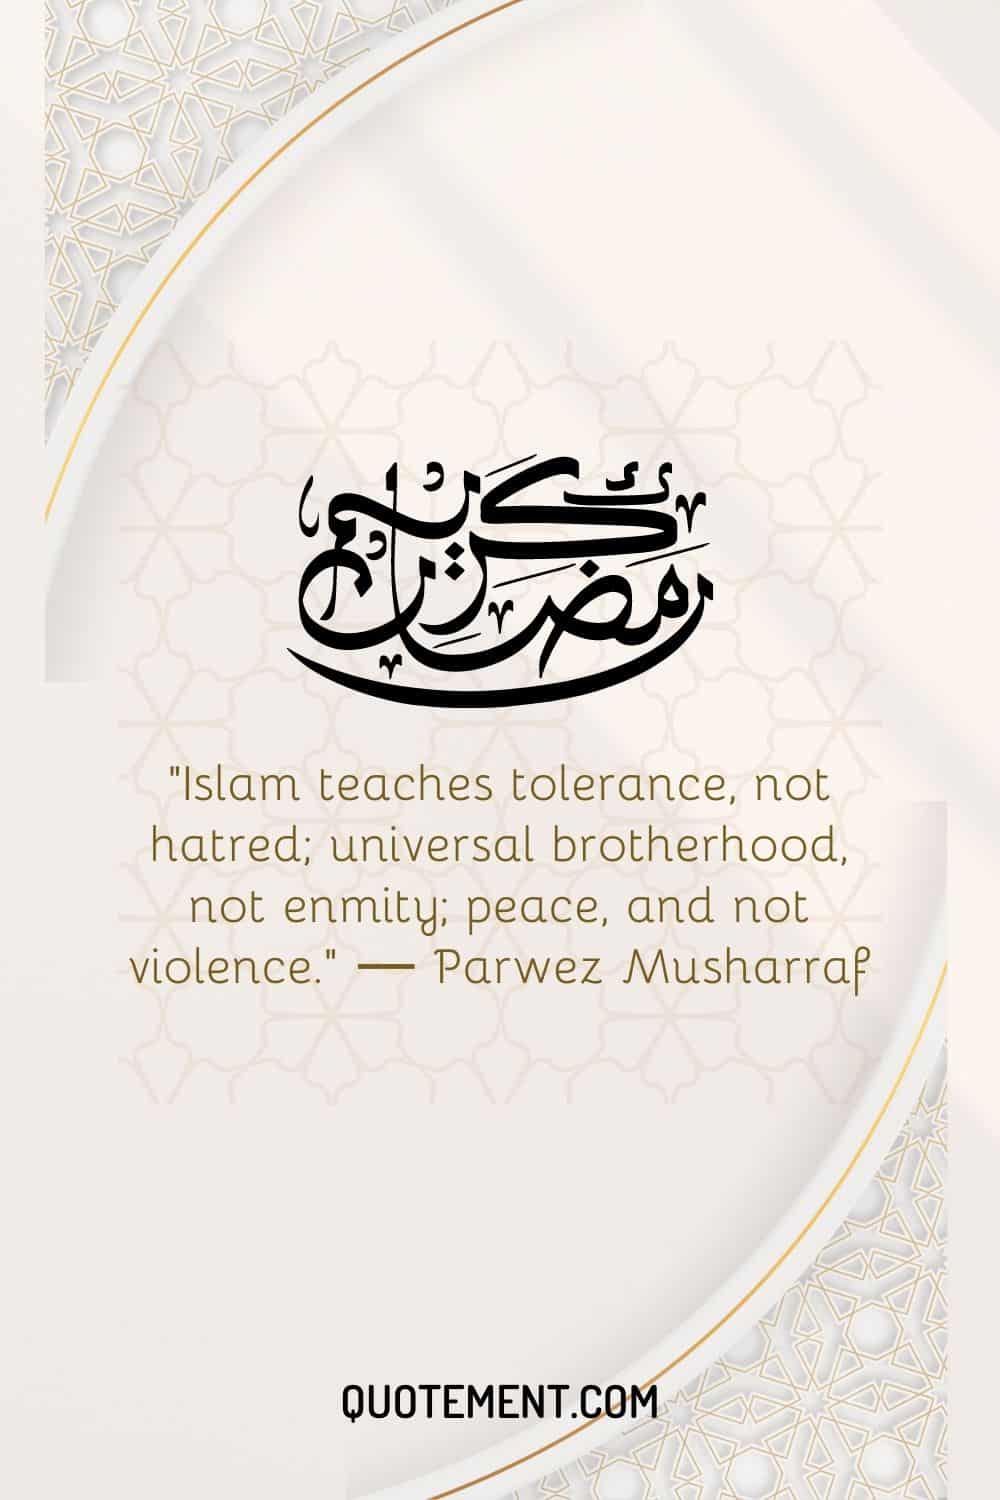 Islam teaches tolerance, not hatred; universal brotherhood, not enmity; peace, and not violence.